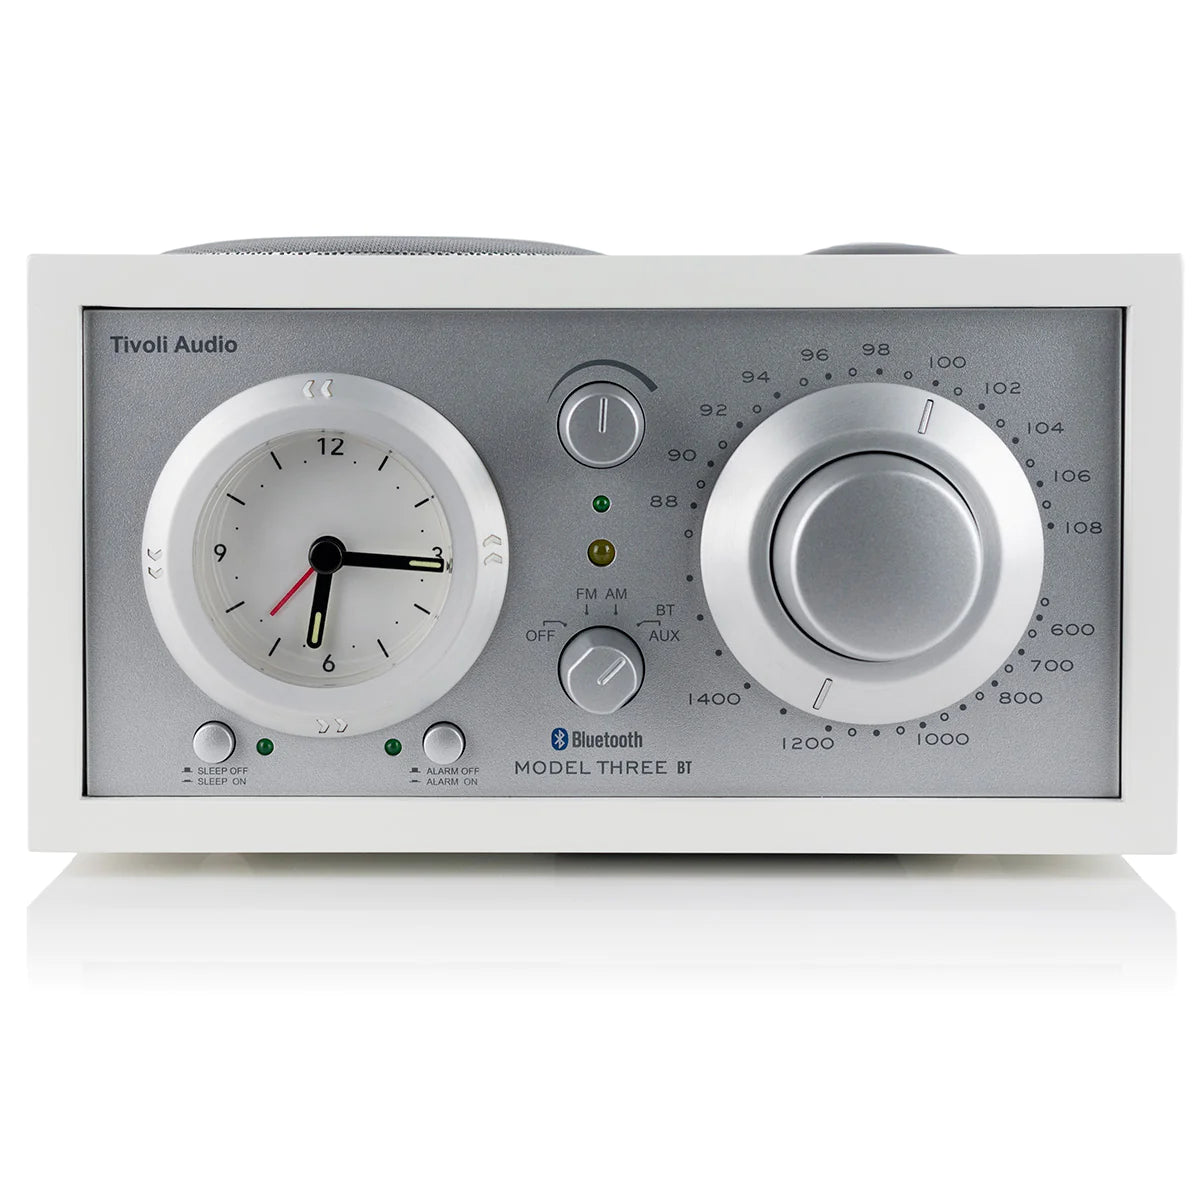 The Tivoli Audio Model Three BT blends classic design, superior sound and Bluetooth connectivity. Front White Silver image